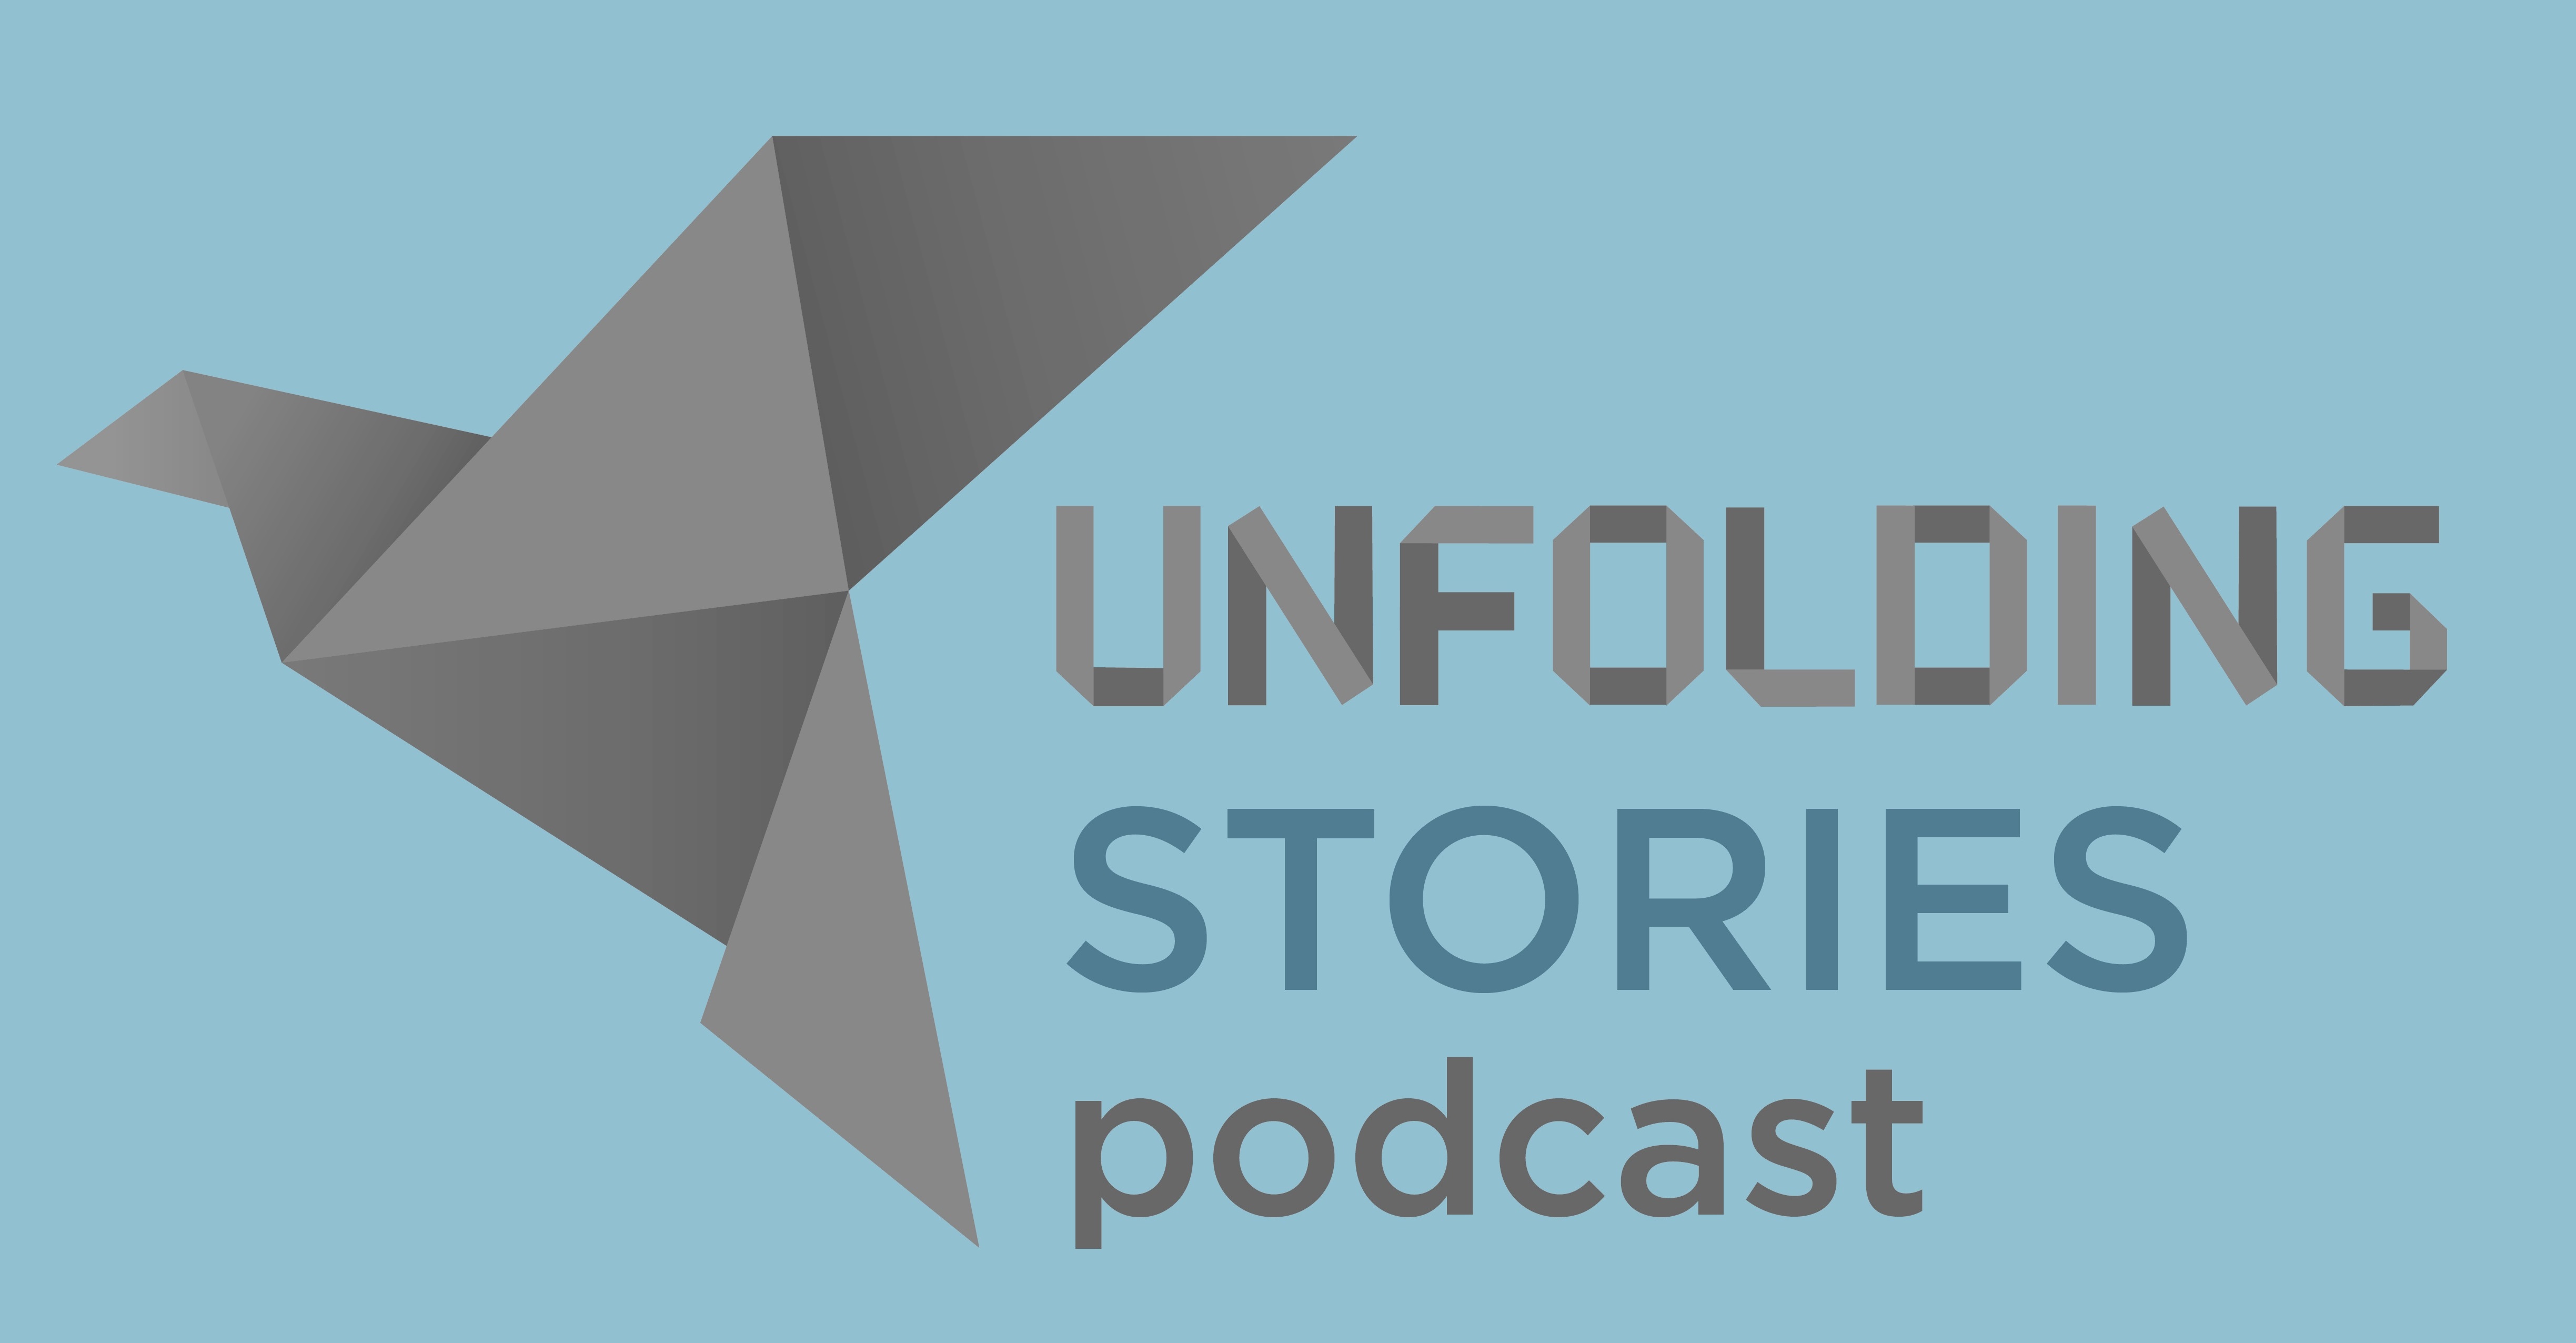 Our Brand New Christian Podcast: Unfolding Stories. Episode 1, CJ Lusk.